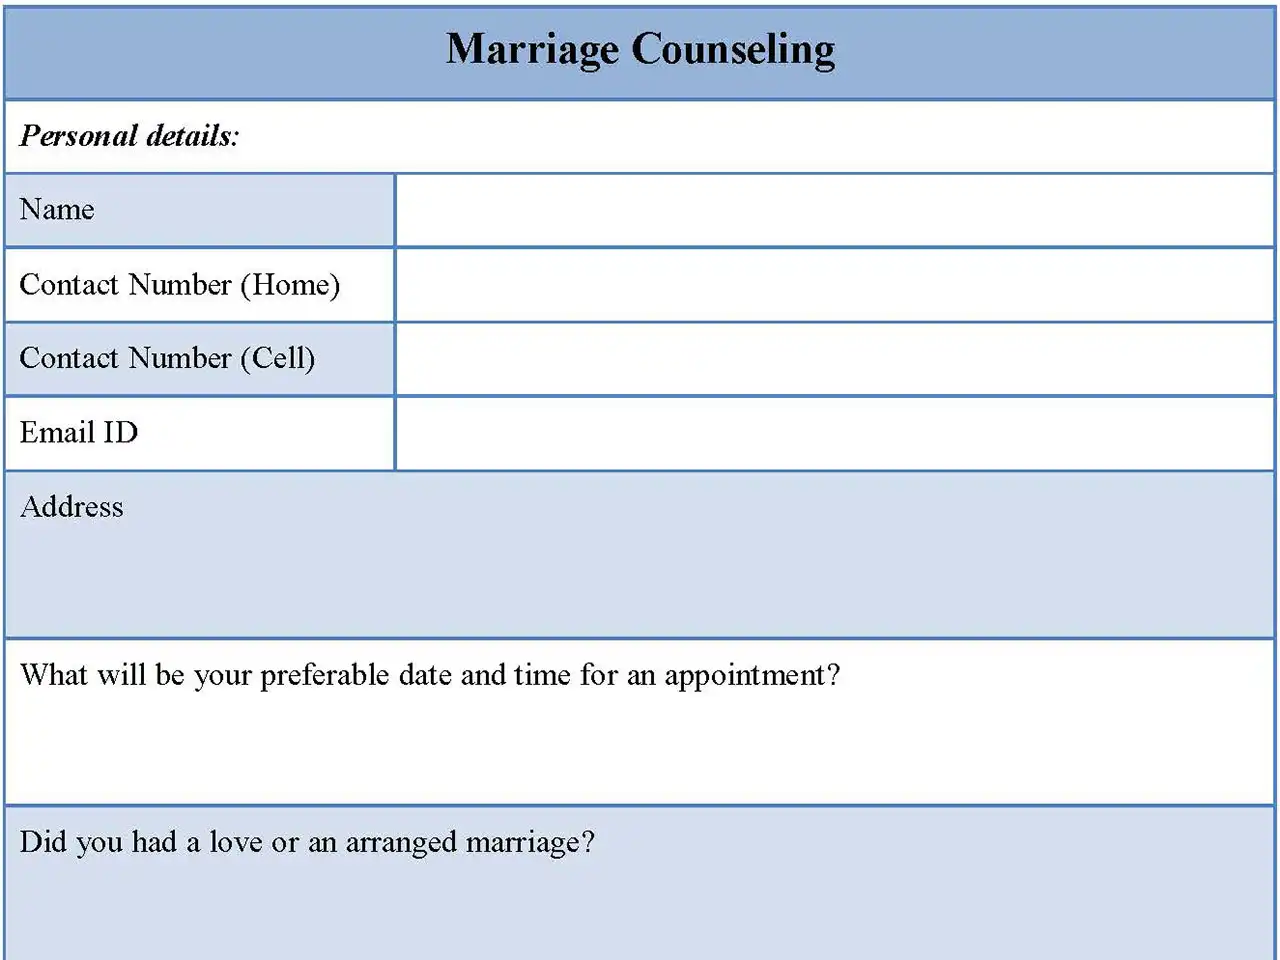 Marriage Counseling Form